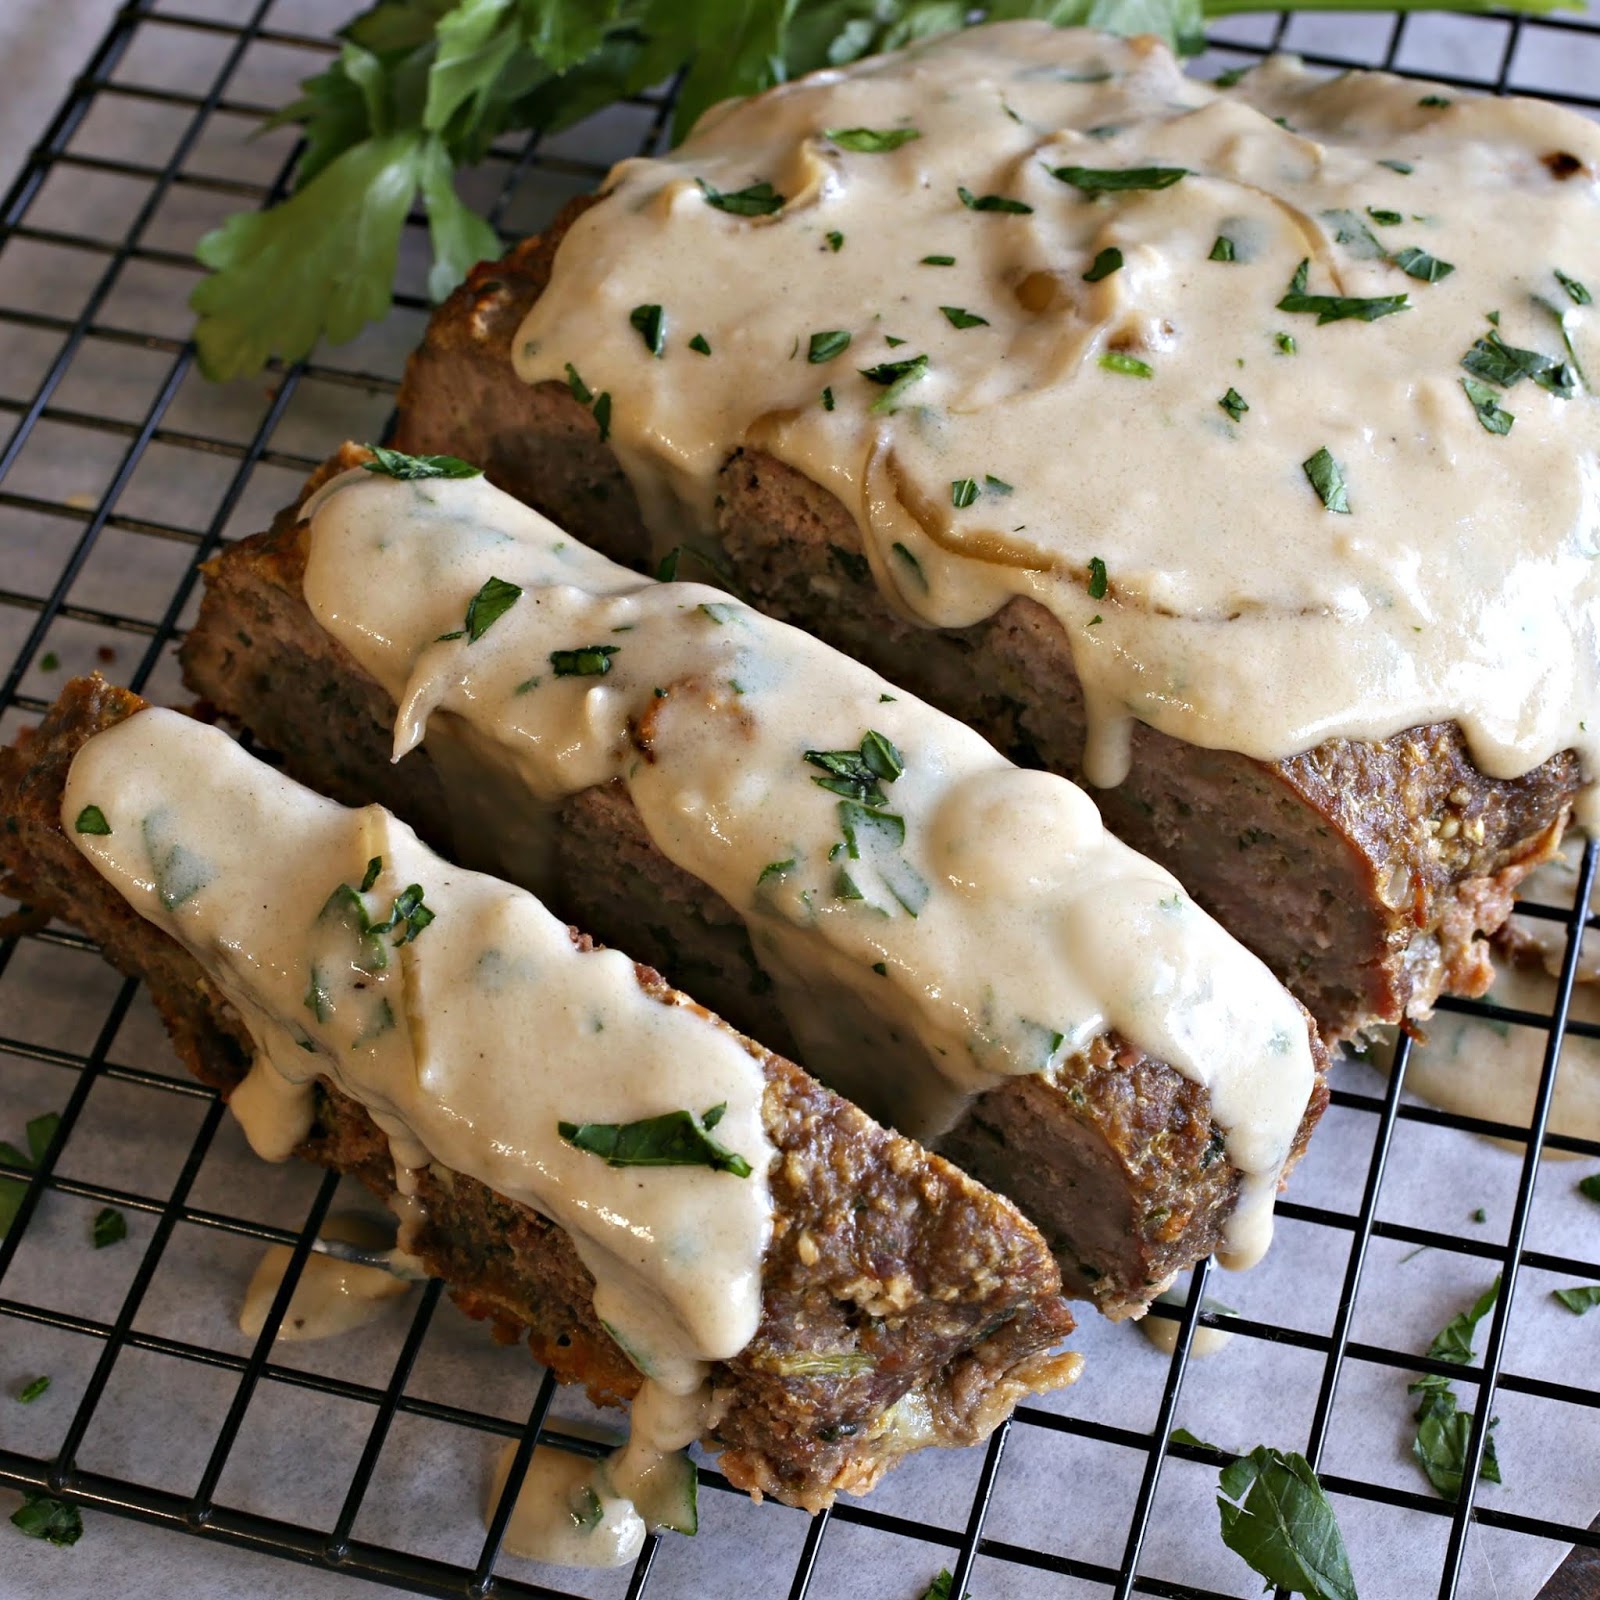 Meatloaf flavored with caramelized onions, fresh thyme and Gruyere cheese.